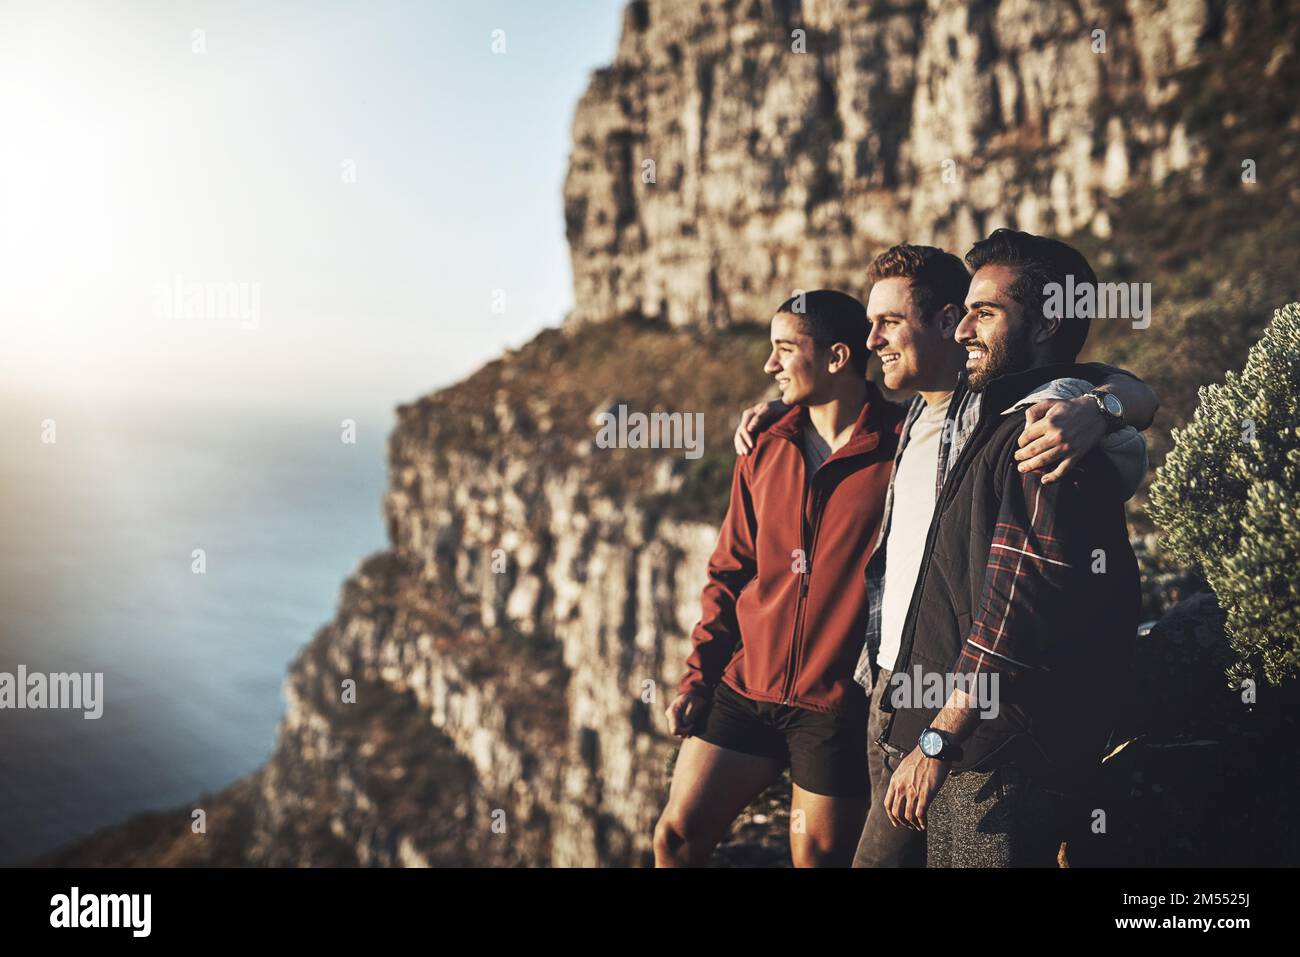 Taking a break on the way to the top. a group of friends admiring the view while hiking in the mountains. Stock Photo